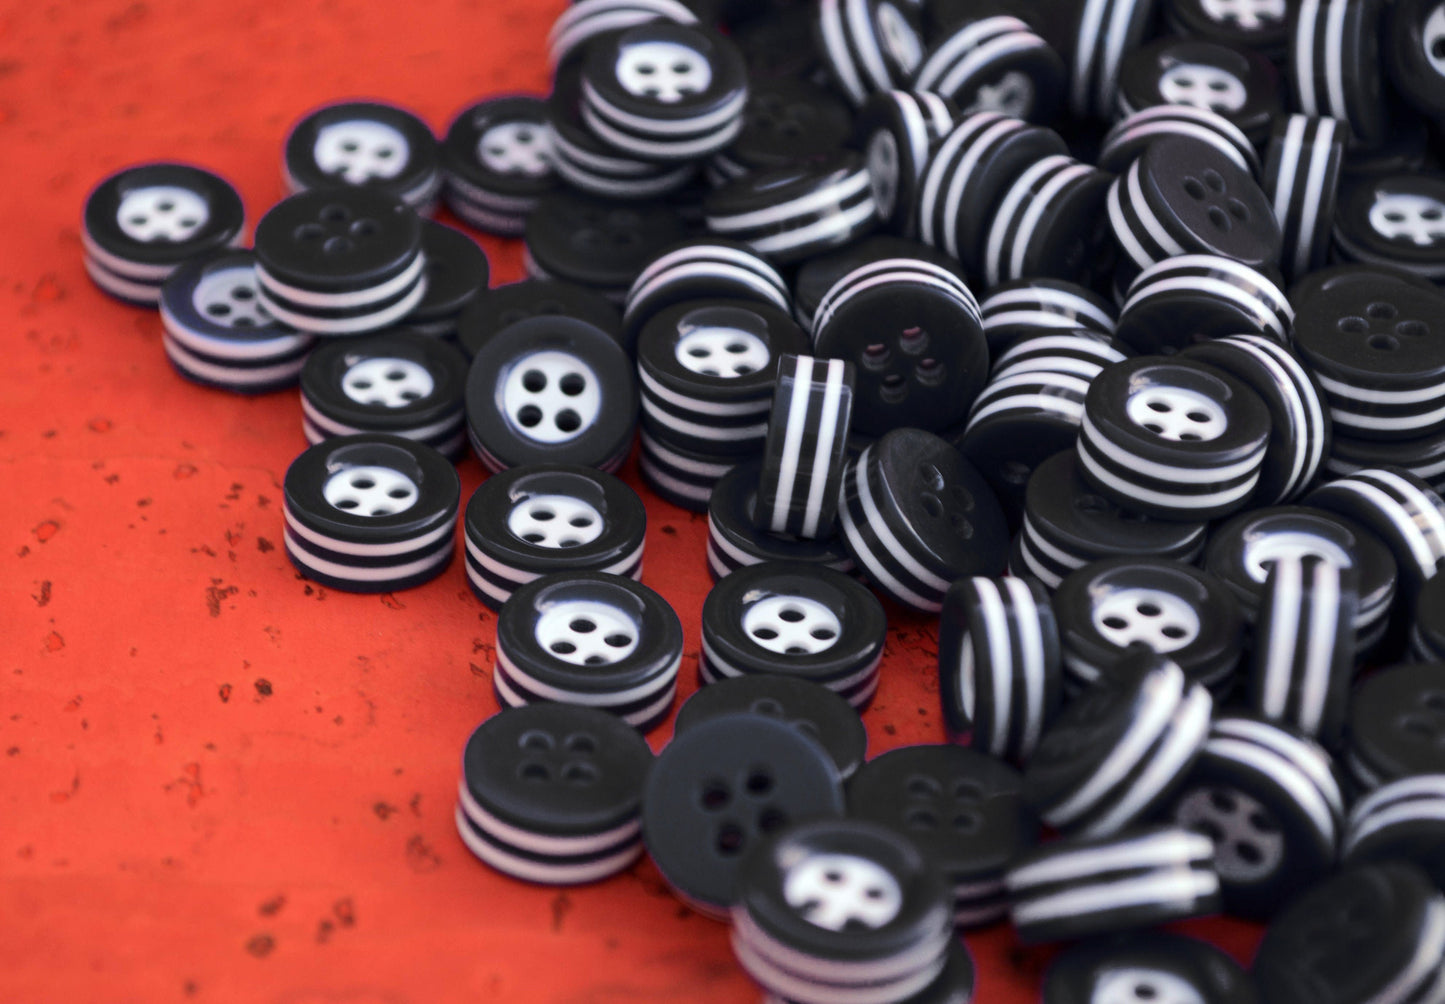 20 white and black STRIPED BUTTONS - 5mm thick! - choose from sizes 18L 16L - great quality - Made in ITALY